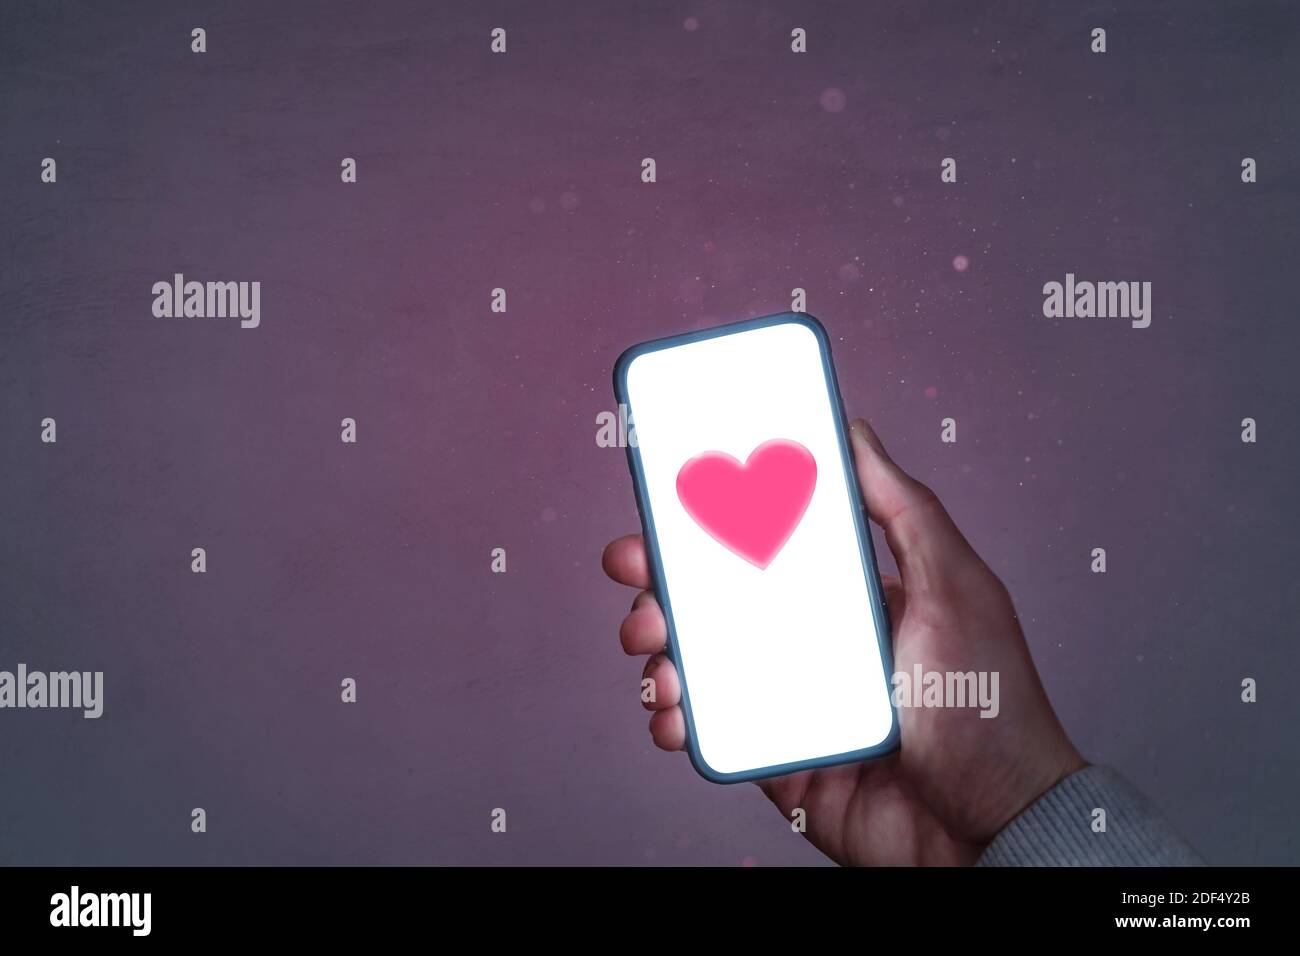 Smartphone screen with a heart symbol Stock Photo